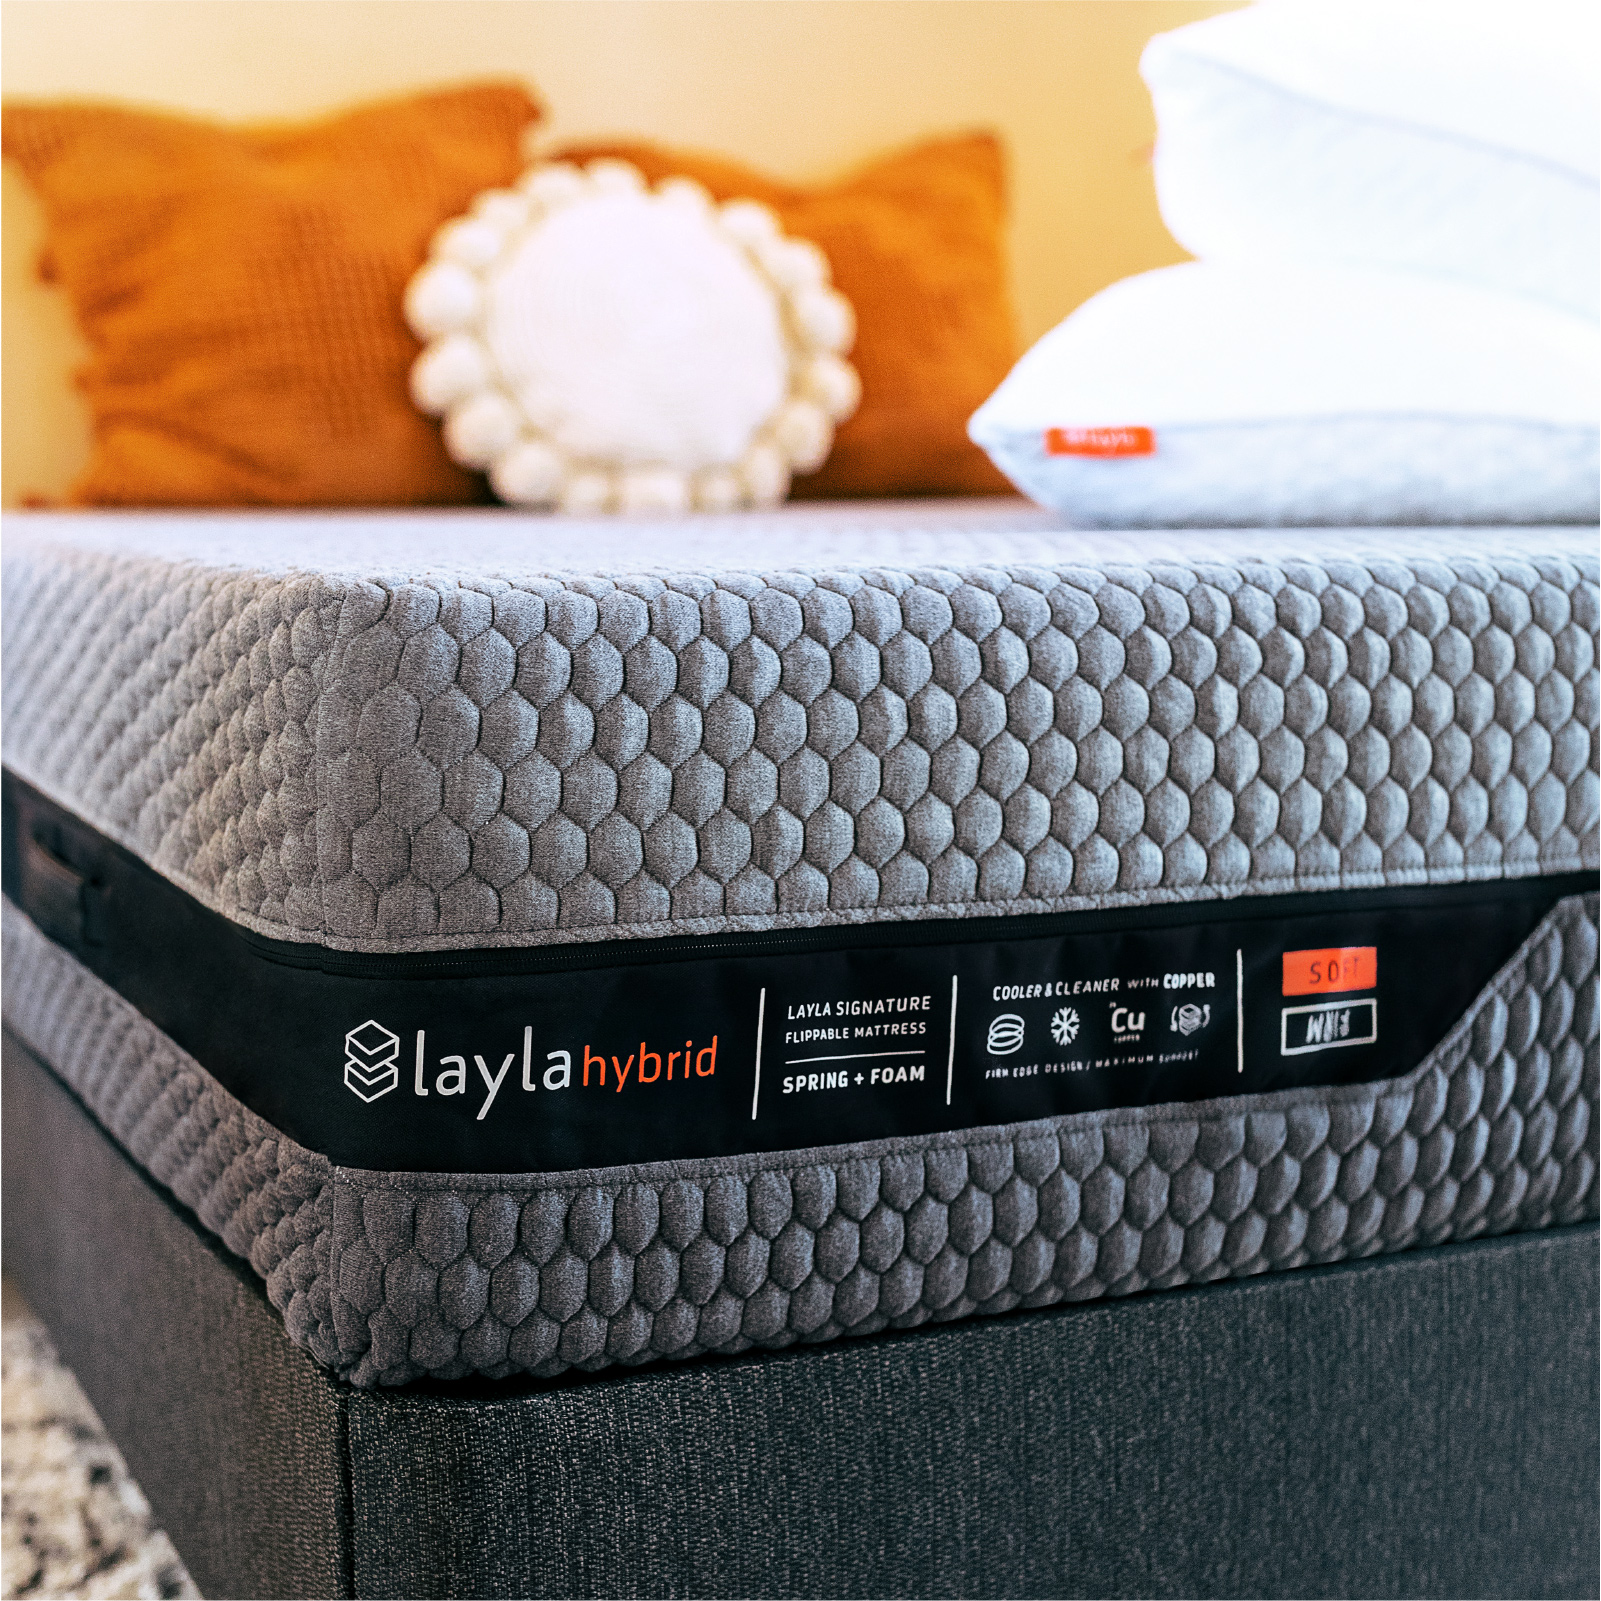 Layla Sleep Hybrid Foam Mattress | Flippable to a Soft or Firm Side (Queen) - image 1 of 7